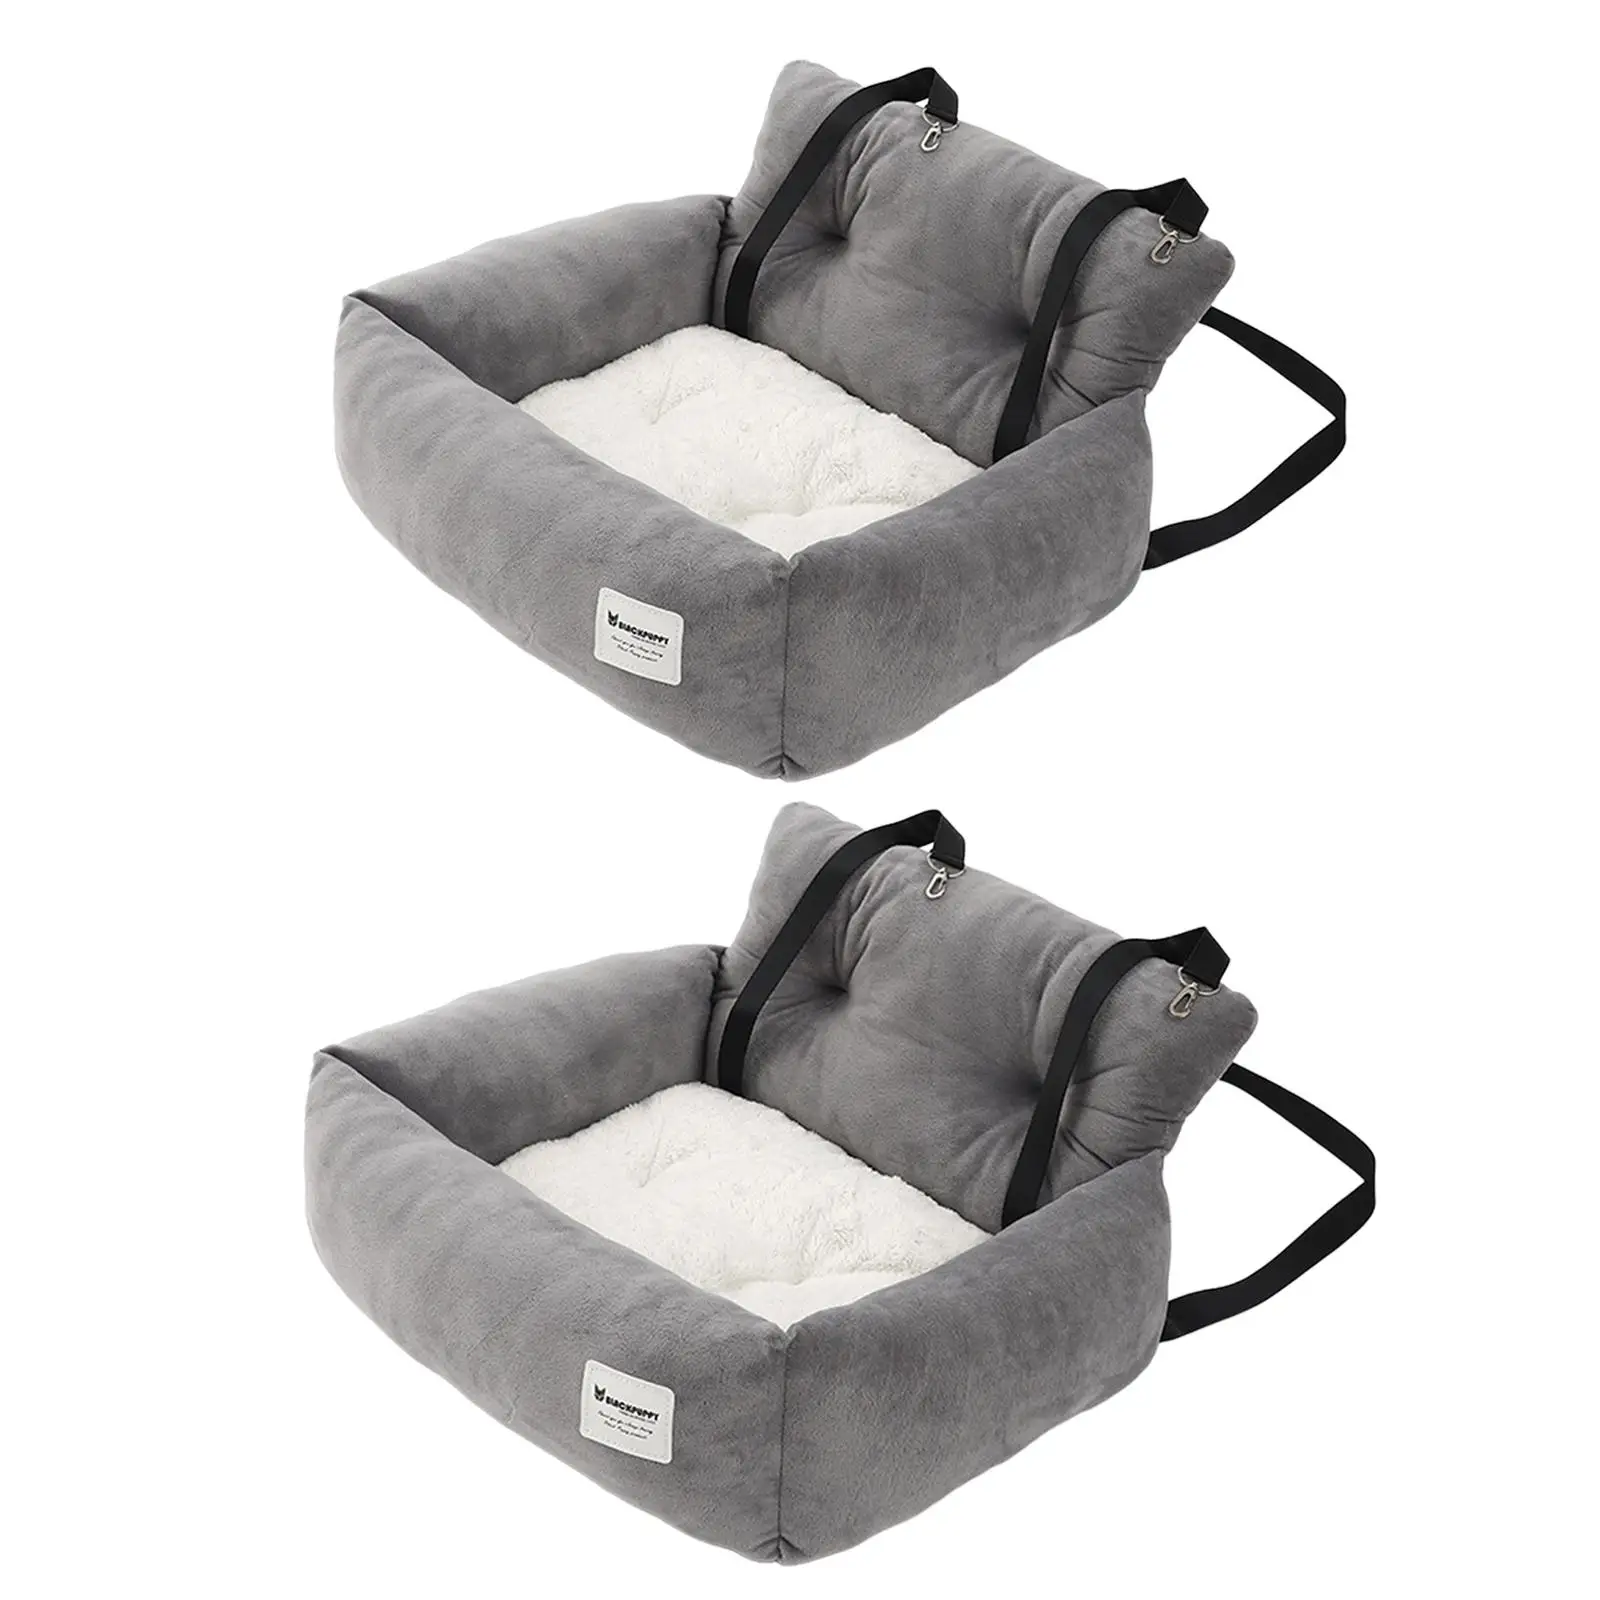 Dog Car SUV Seat Puppy Bed with Fixed Strap Multifunctional Removable Anti Slip Bottom Washable Portable Gray for Traveling